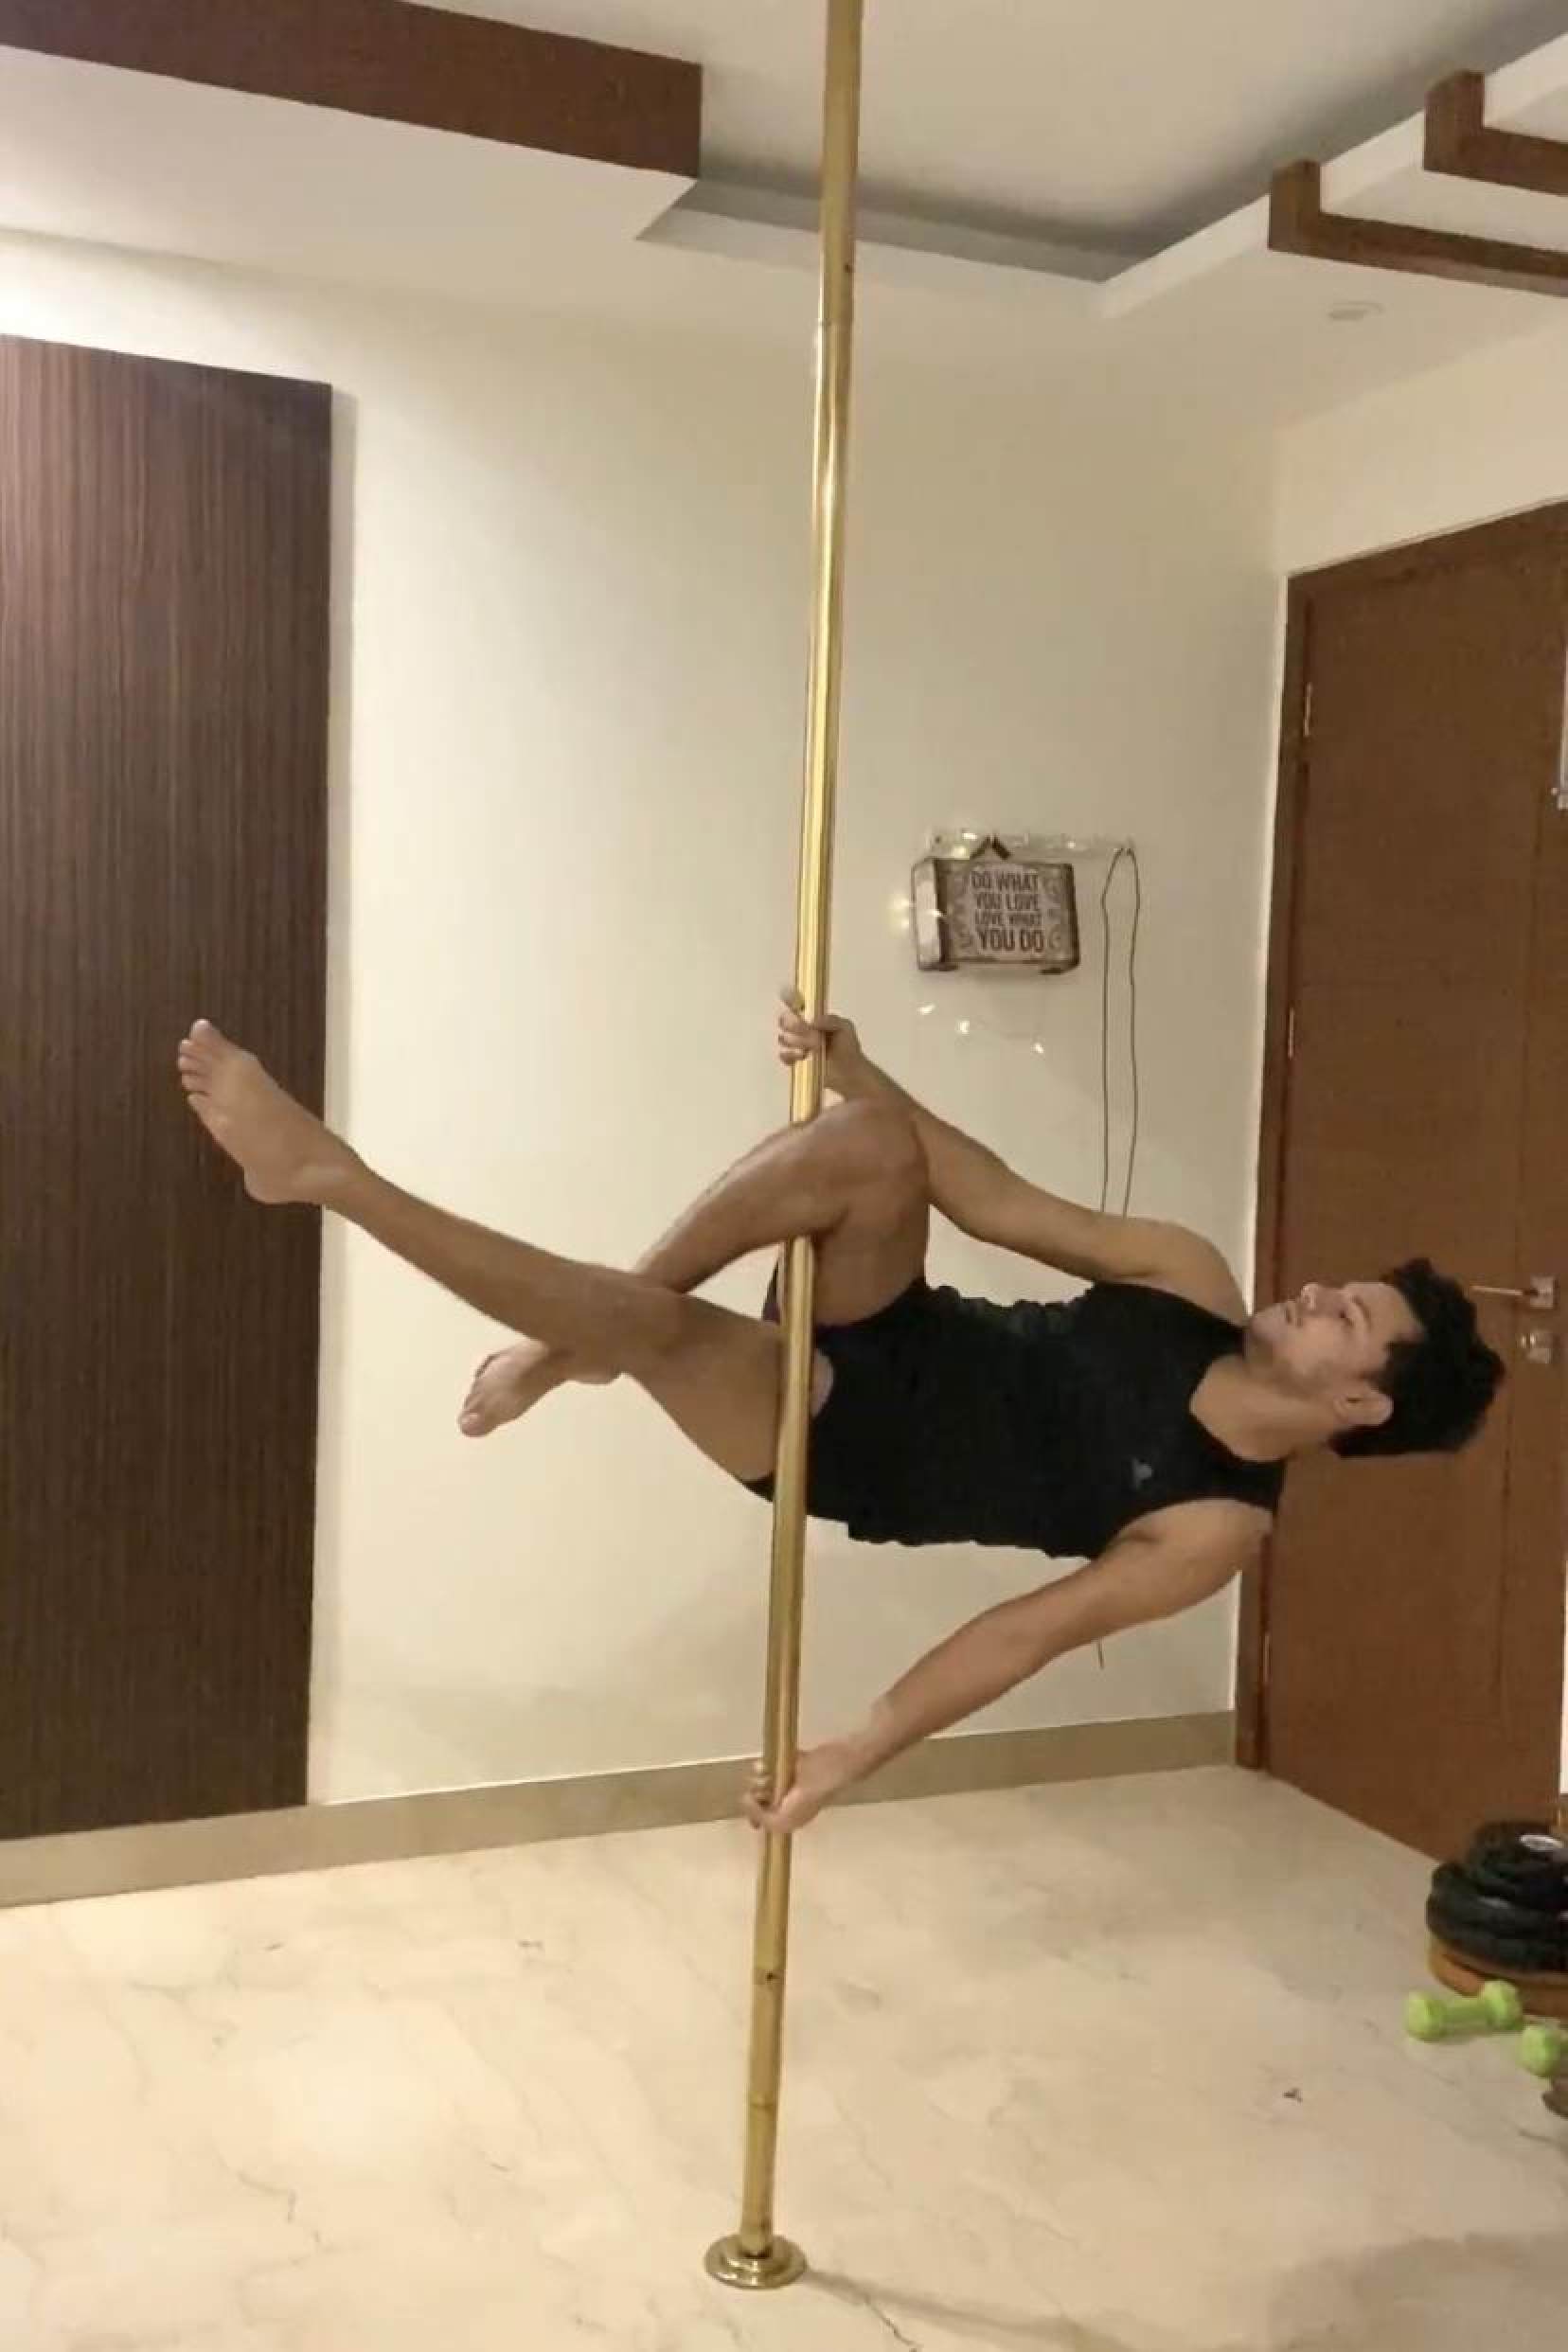 Pole dancing is a hot pandemic workout in conservative India – men